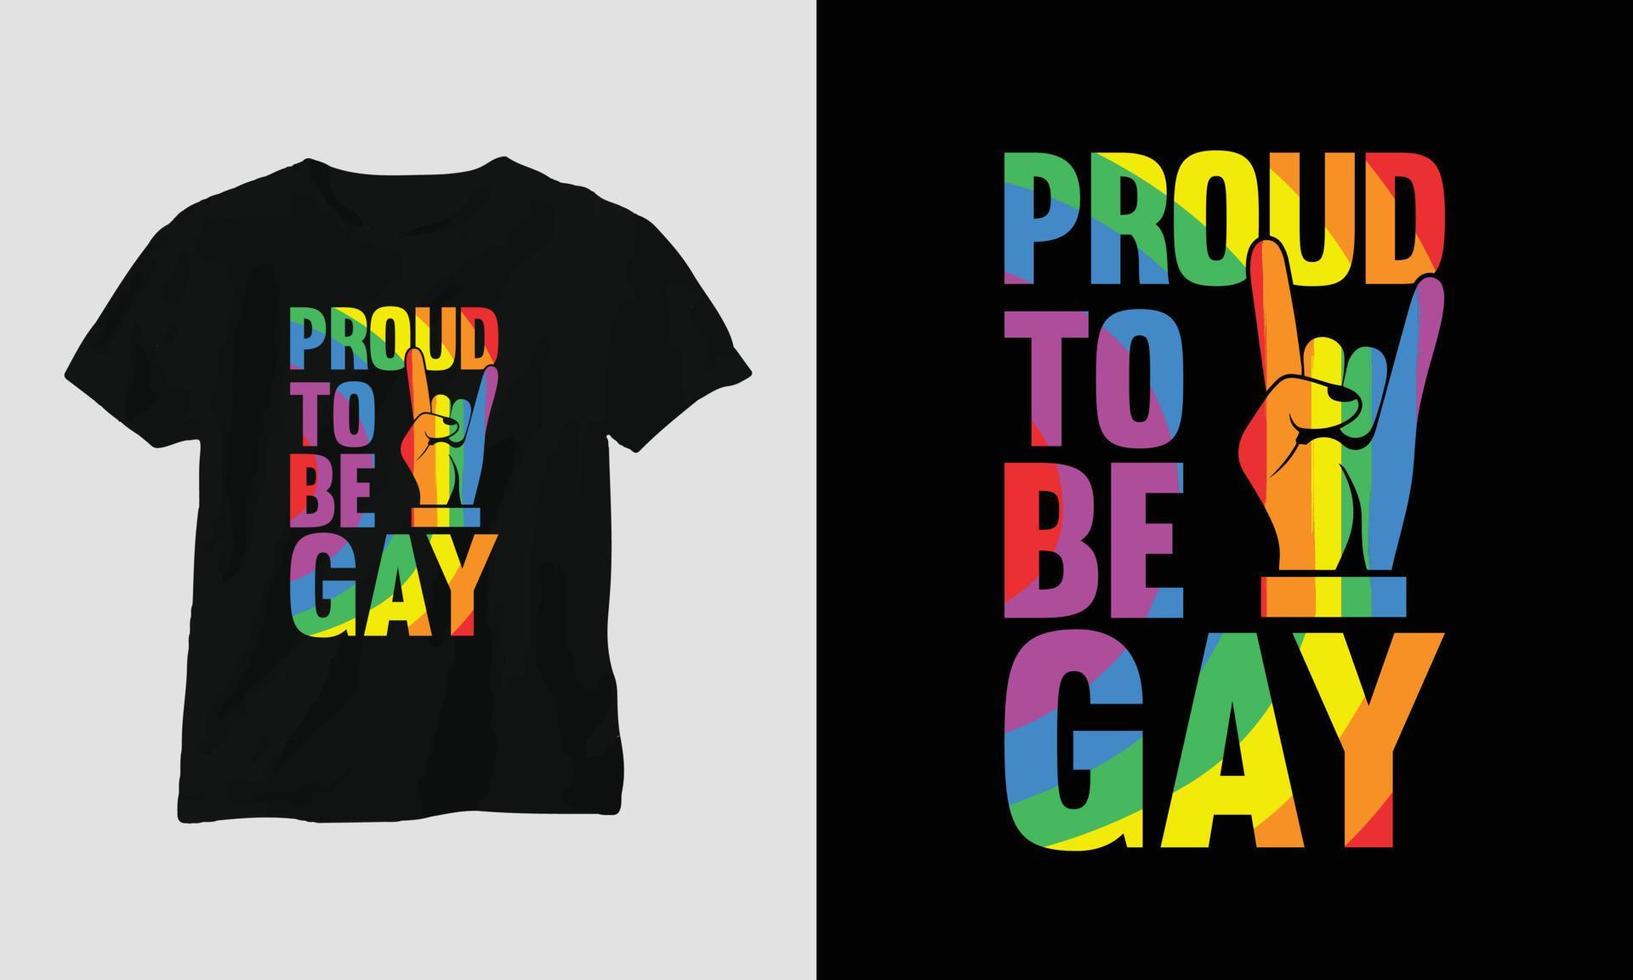 proud to be gay - LGBT T-shirt and apparel design. Vector print, typography, poster, emblem, festival, pride, couple